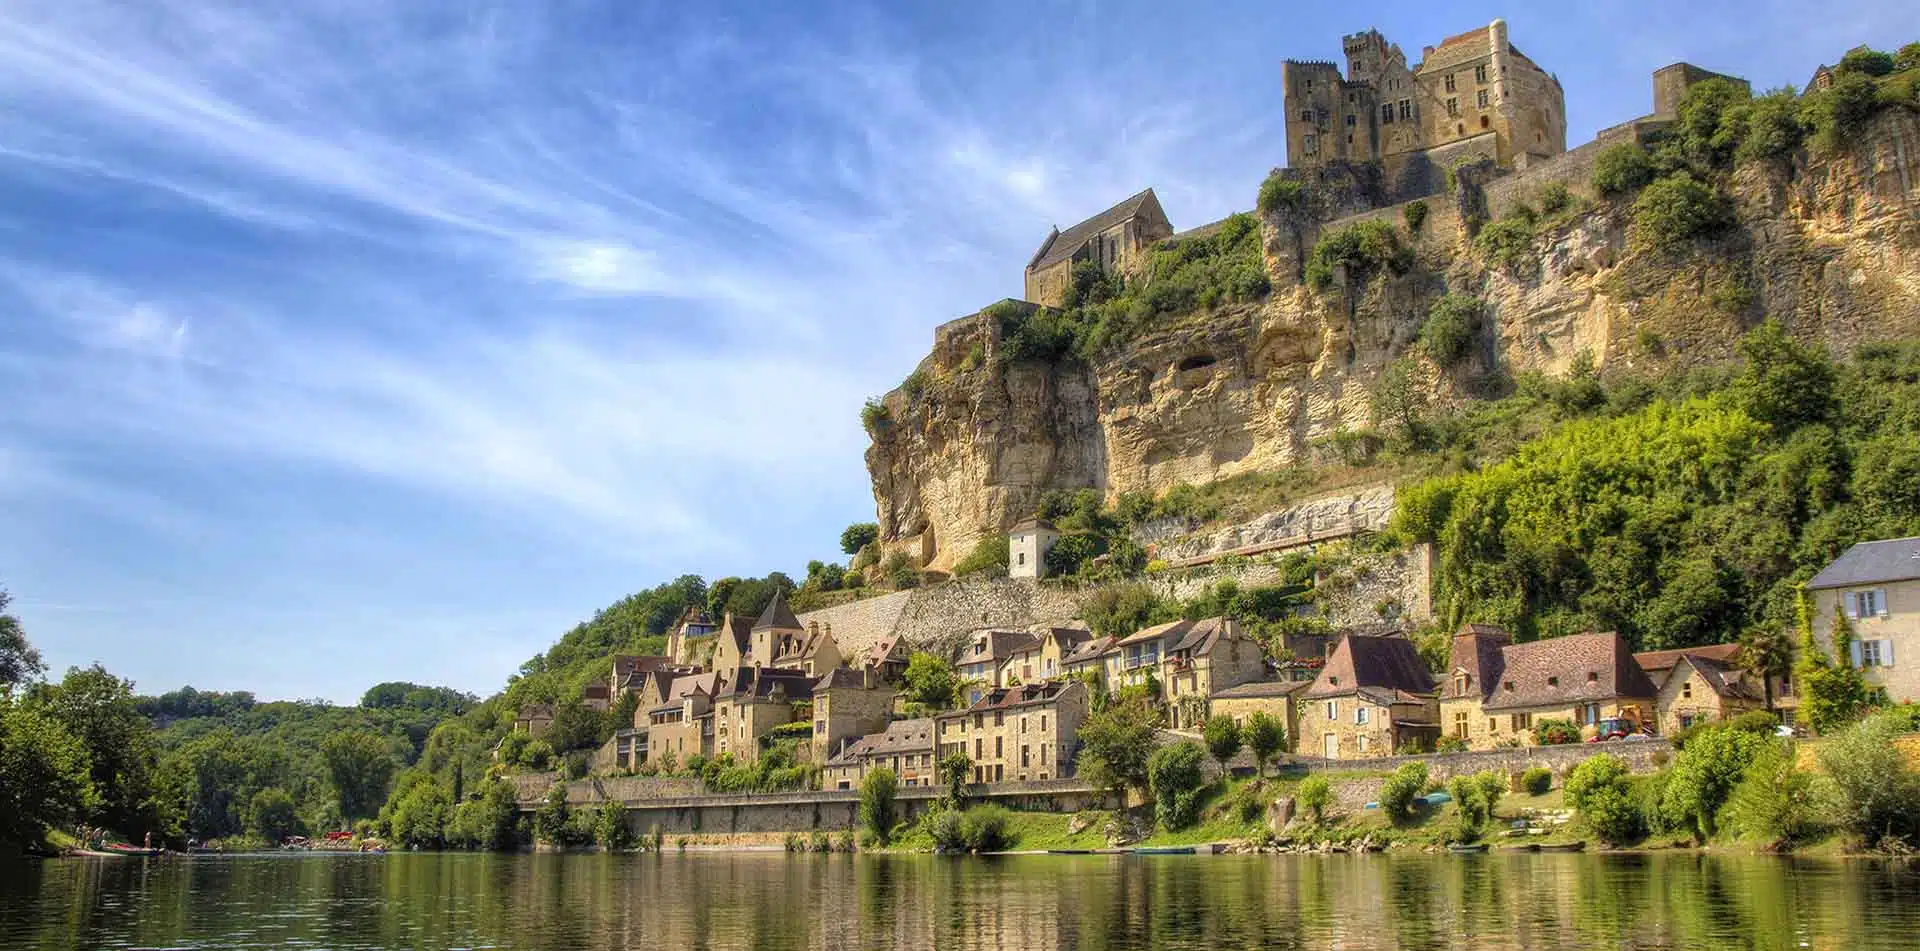 View of Beynac from River, Dordogne Valley, France